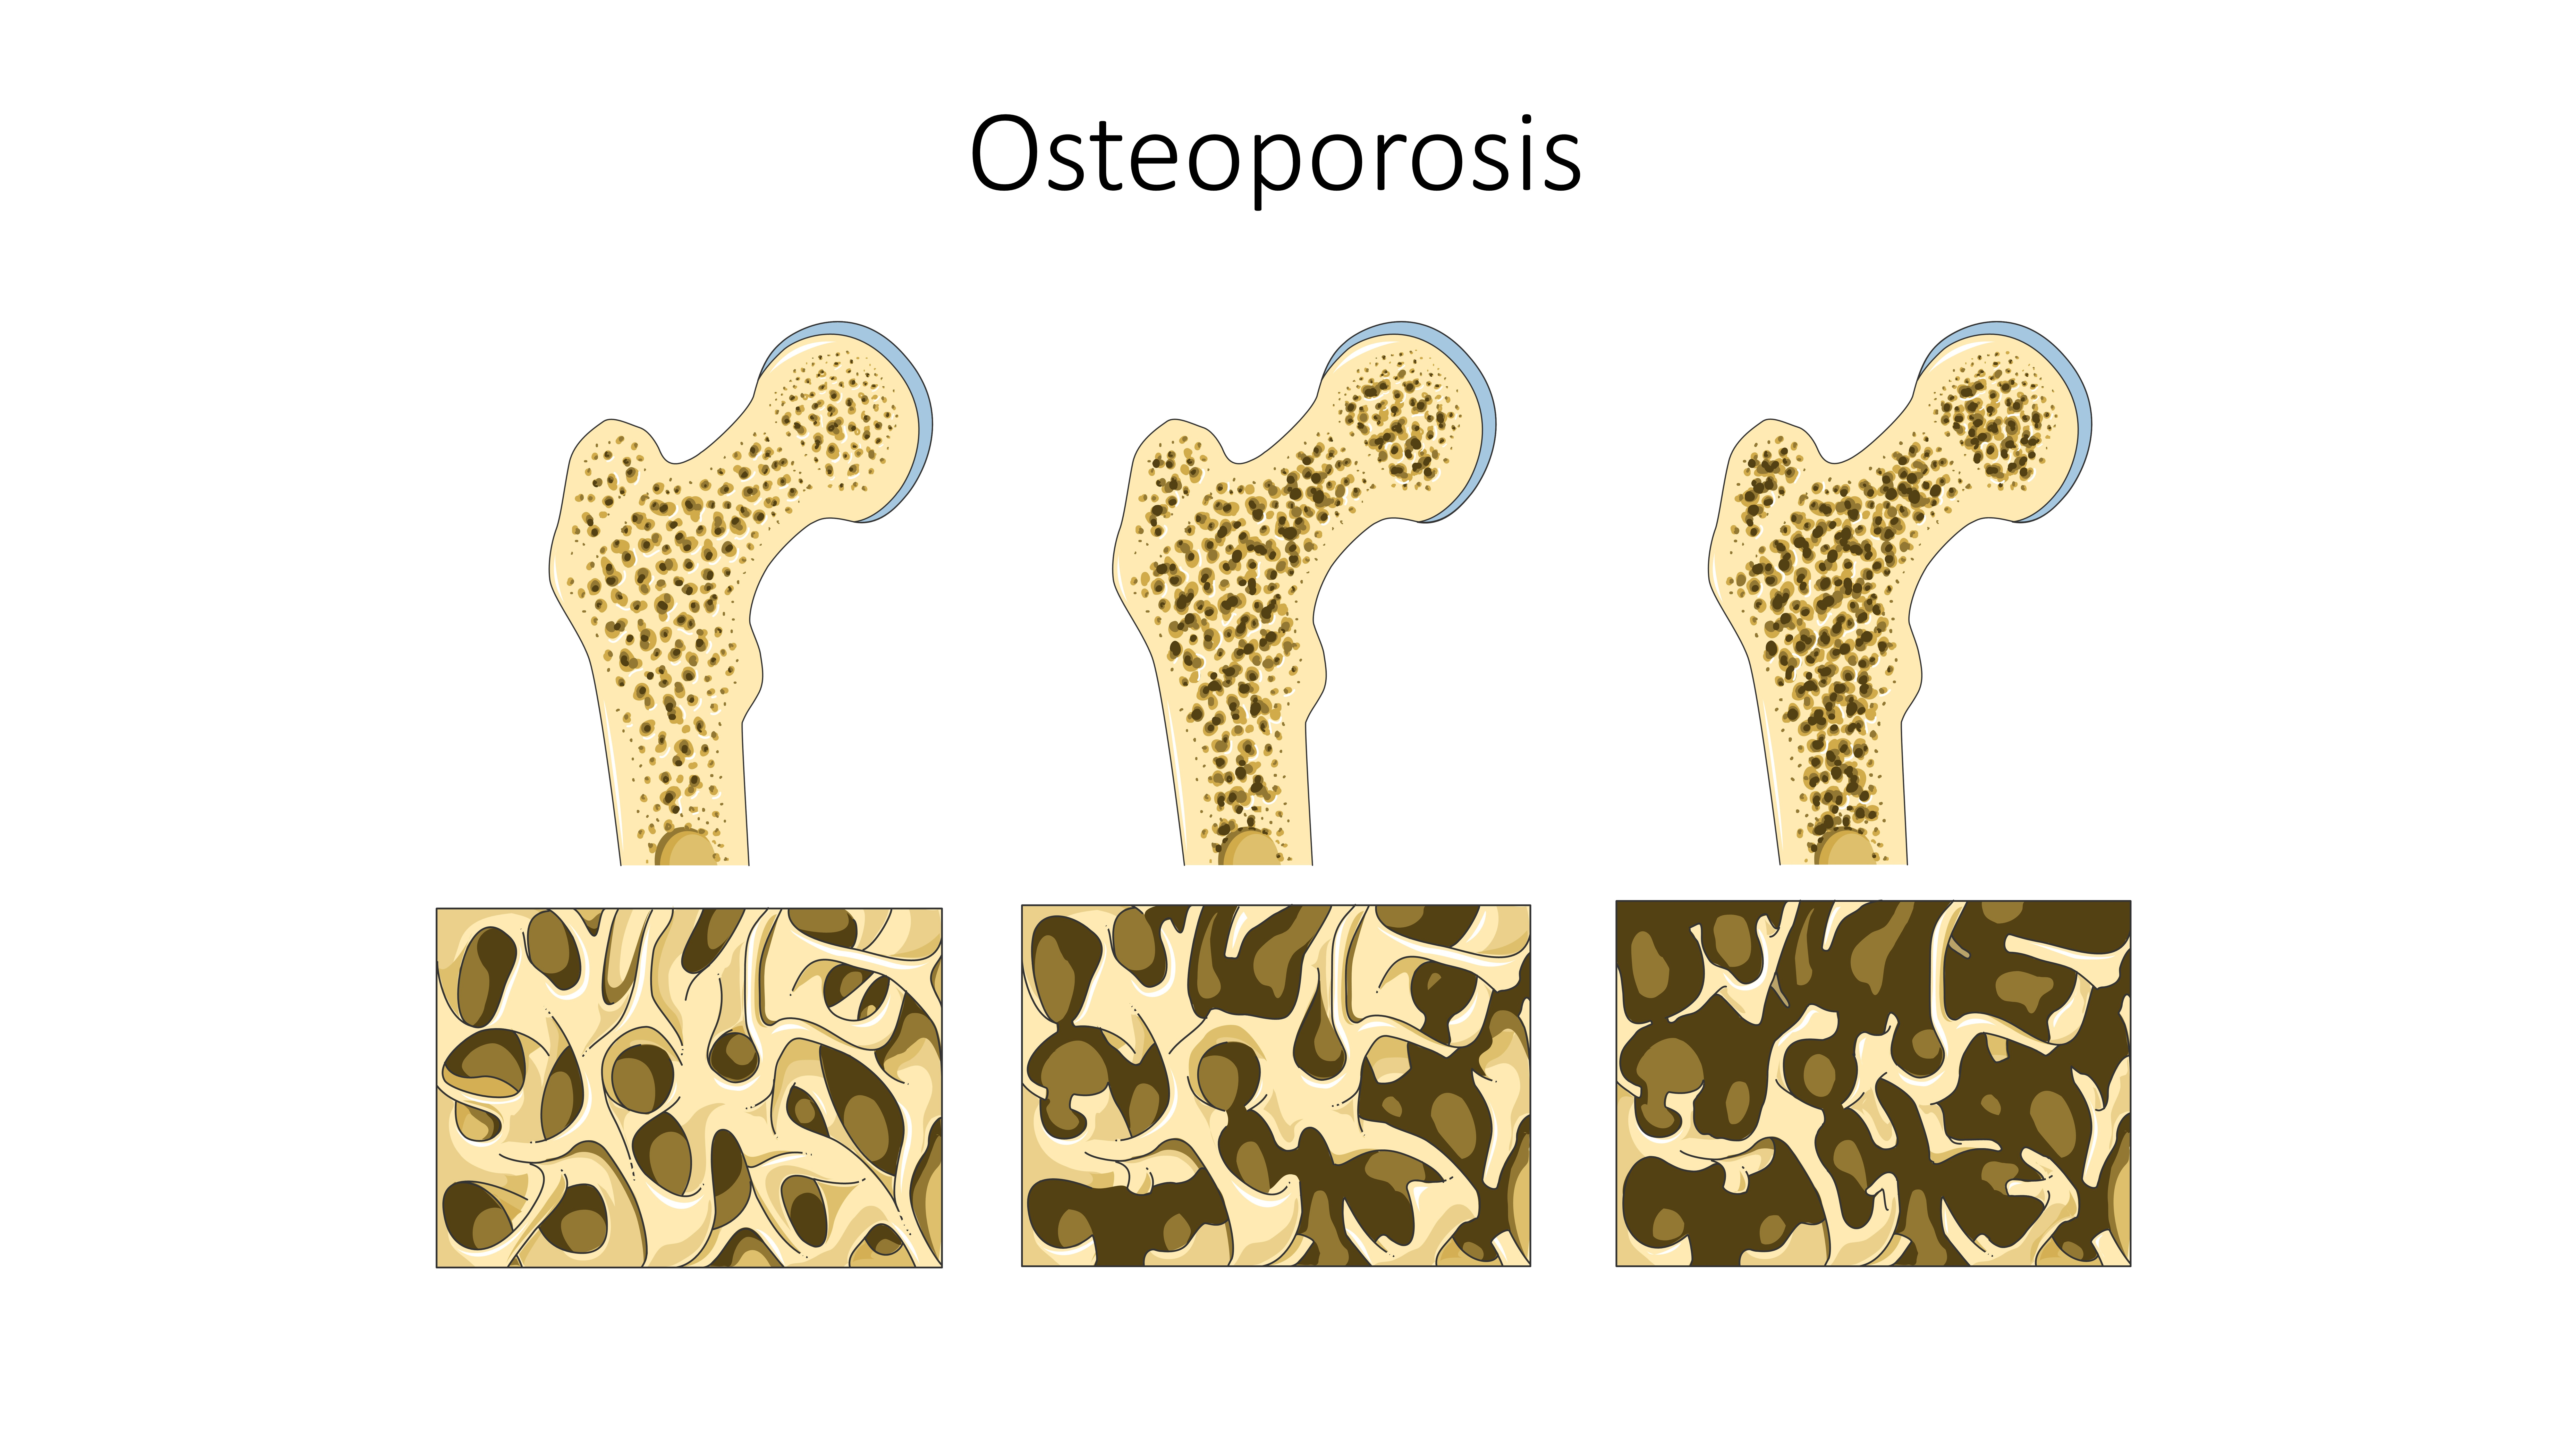 Bone structure of Osteoporosis